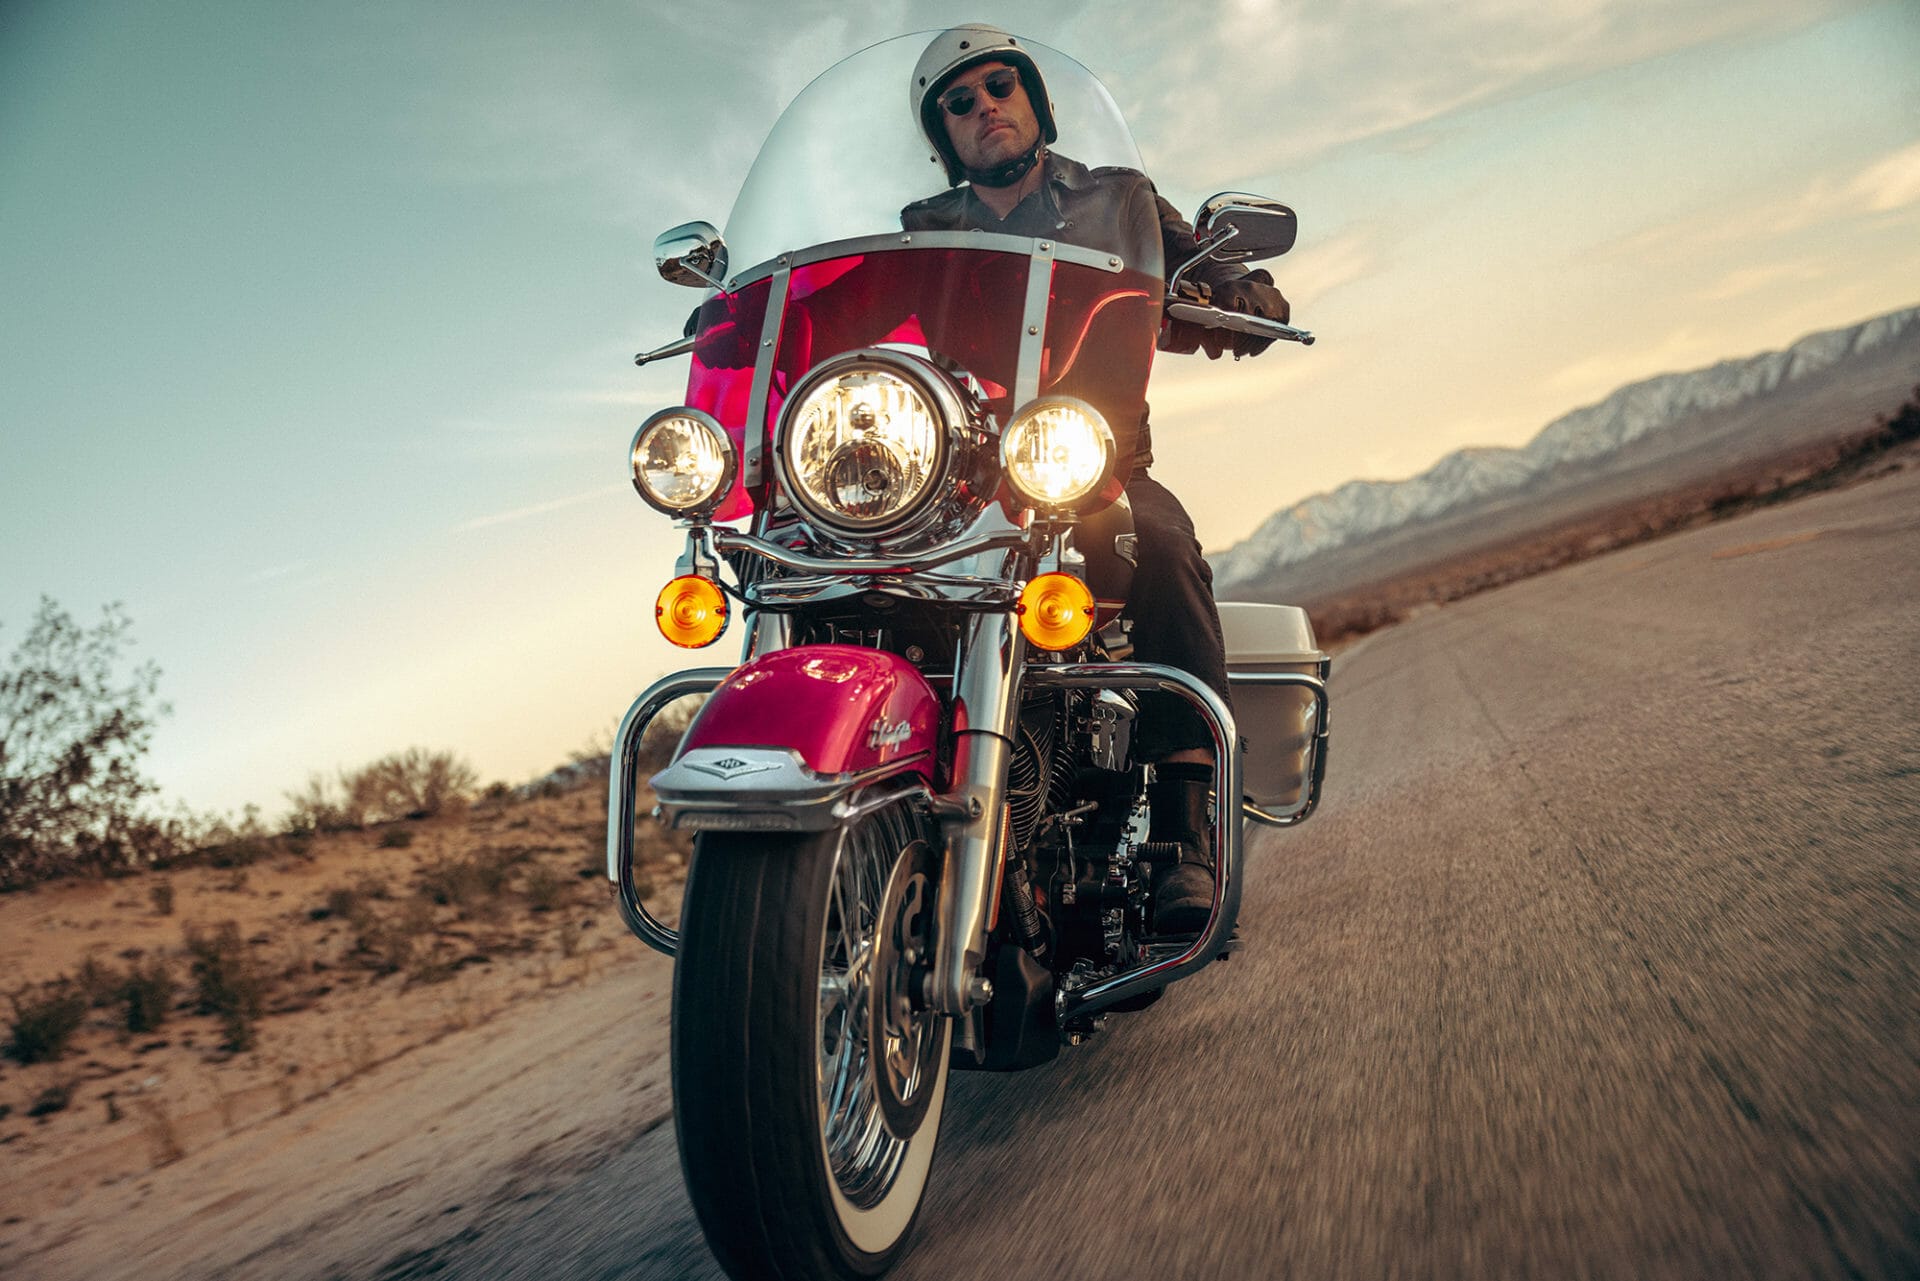 Nostalgia meets modernity: The limited-edition Harley-Davidson Electra Glide Highway King.